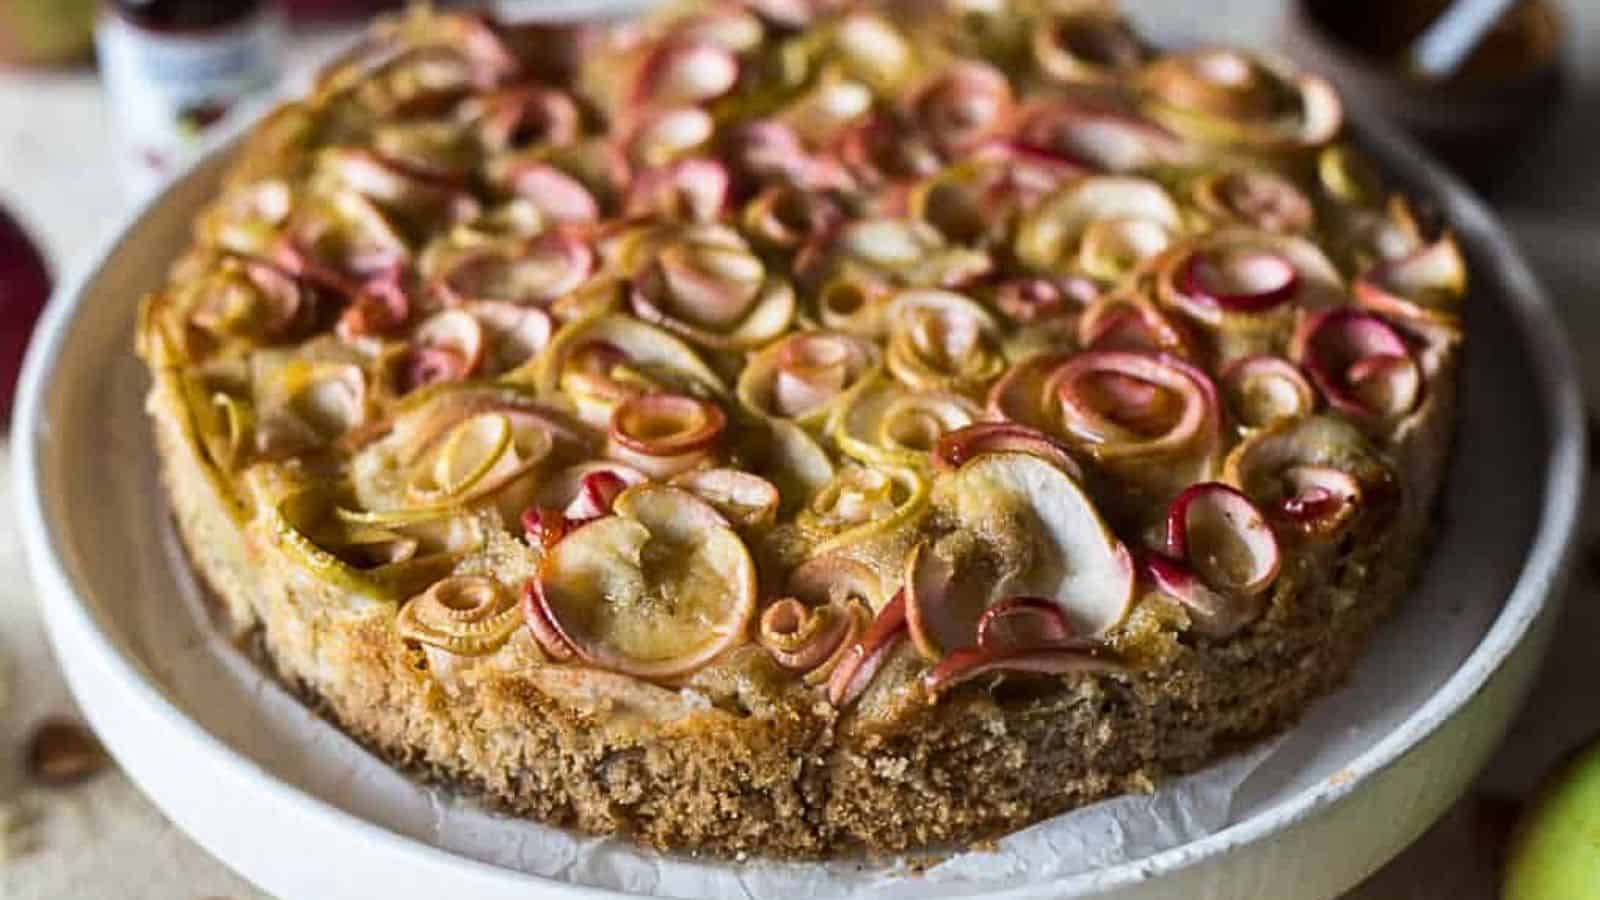 <p>Highlight your Hanukkah dessert table with elegance and flavor by serving almond apple cake with apple roses. This visually stunning dessert captivates with rose-shaped apples and delights the palate with the nutty and fruity goodness of almond and apple, making your celebration sweet and sophisticated.<br><strong>Get the Recipe: </strong><a href="https://immigrantstable.com/almond-apple-cake-with-apple-roses-rosh-hashana/?utm_source=msn&utm_medium=page&utm_campaign=25%20hanukkah%20desserts%20that%20guarantee%20a%20sweet%20celebration">Almond Apple Cake with Apple Roses</a></p>